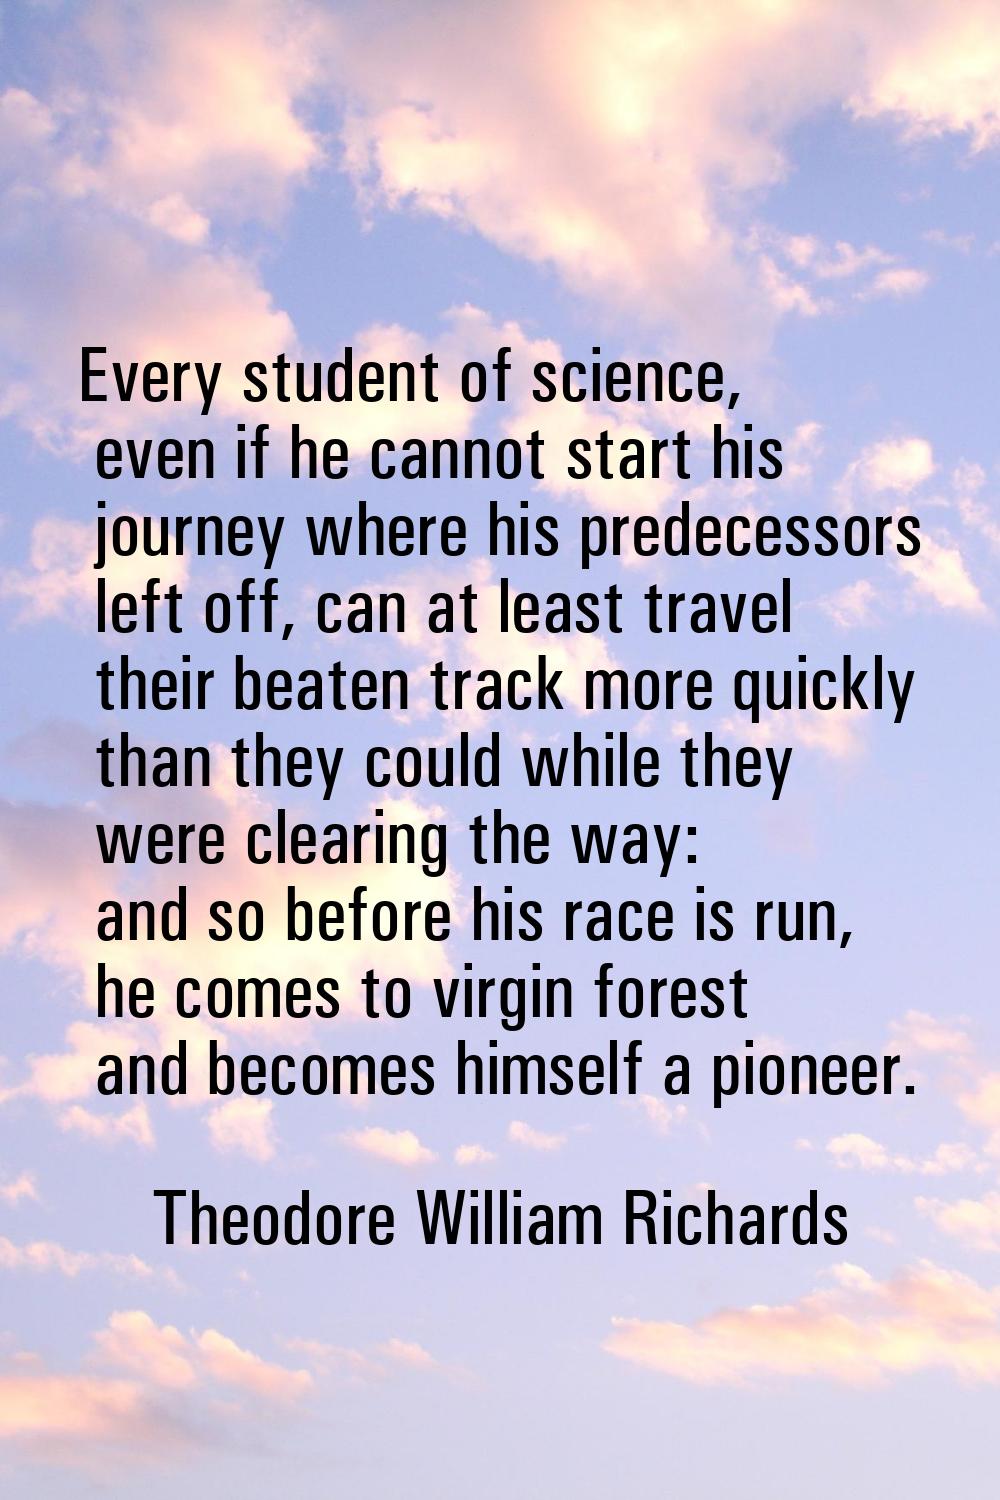 Every student of science, even if he cannot start his journey where his predecessors left off, can 